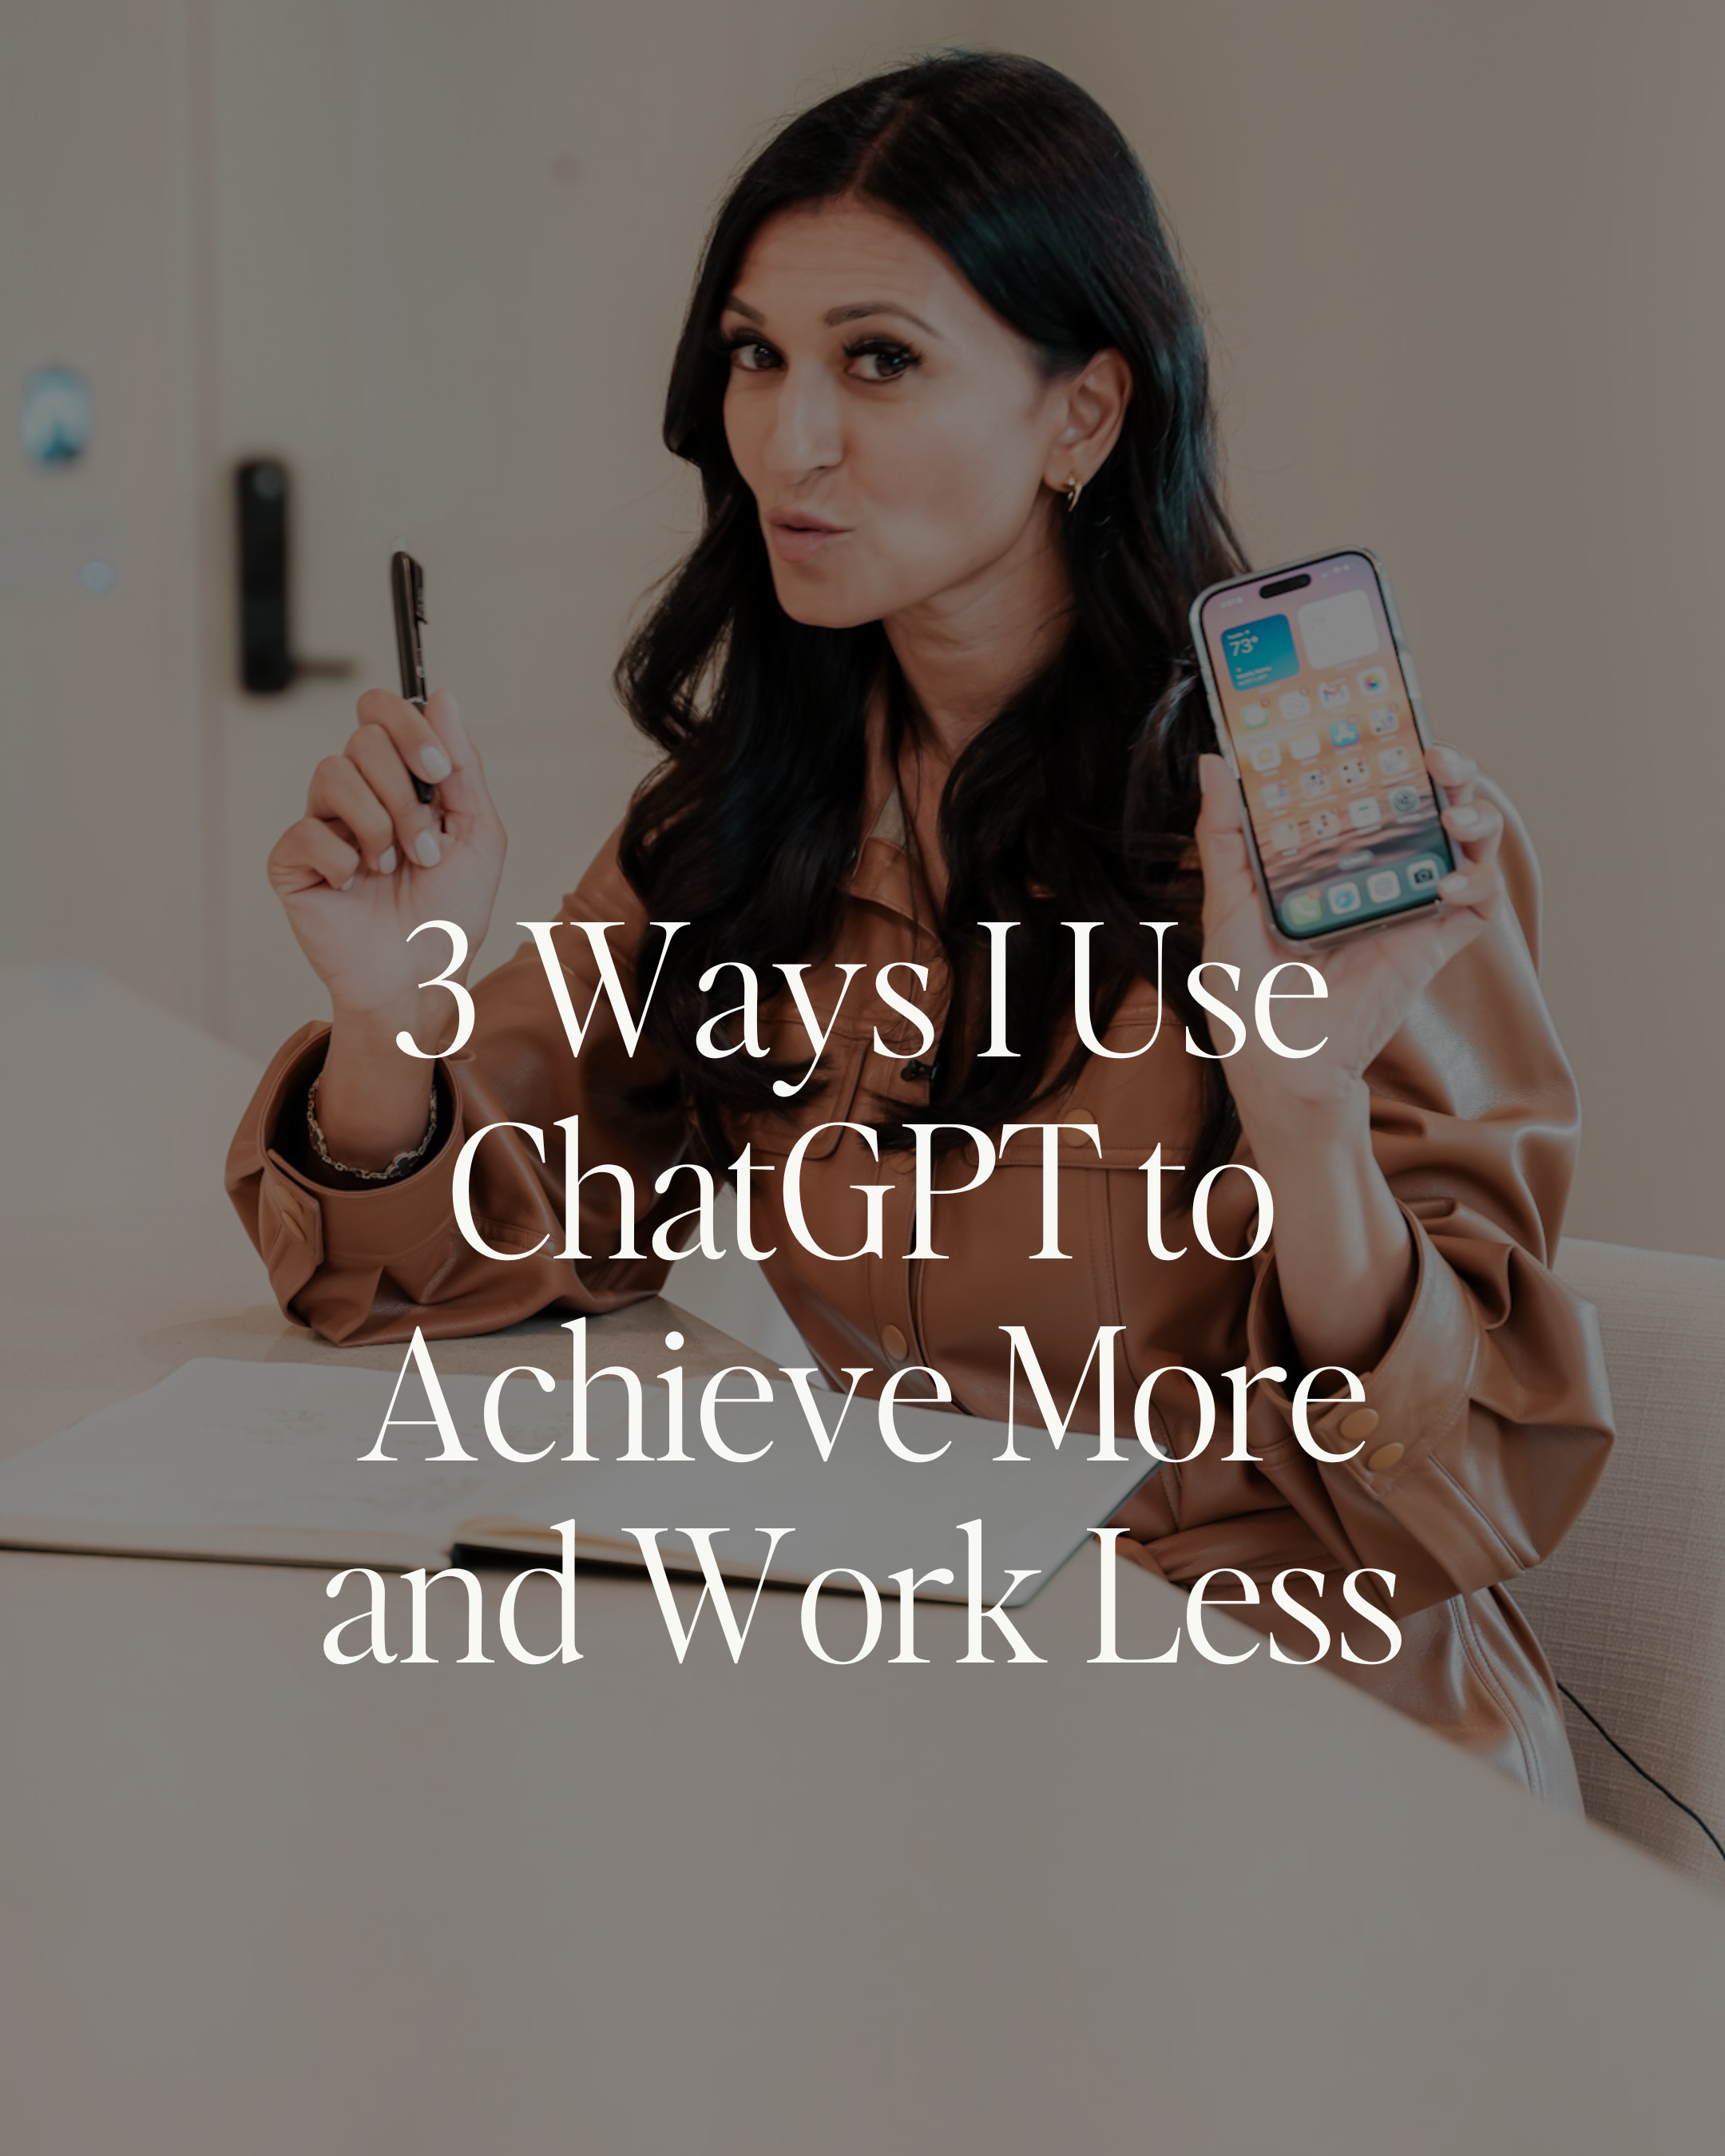 3 Ways I Use ChatGPT to Achieve More and Work Less